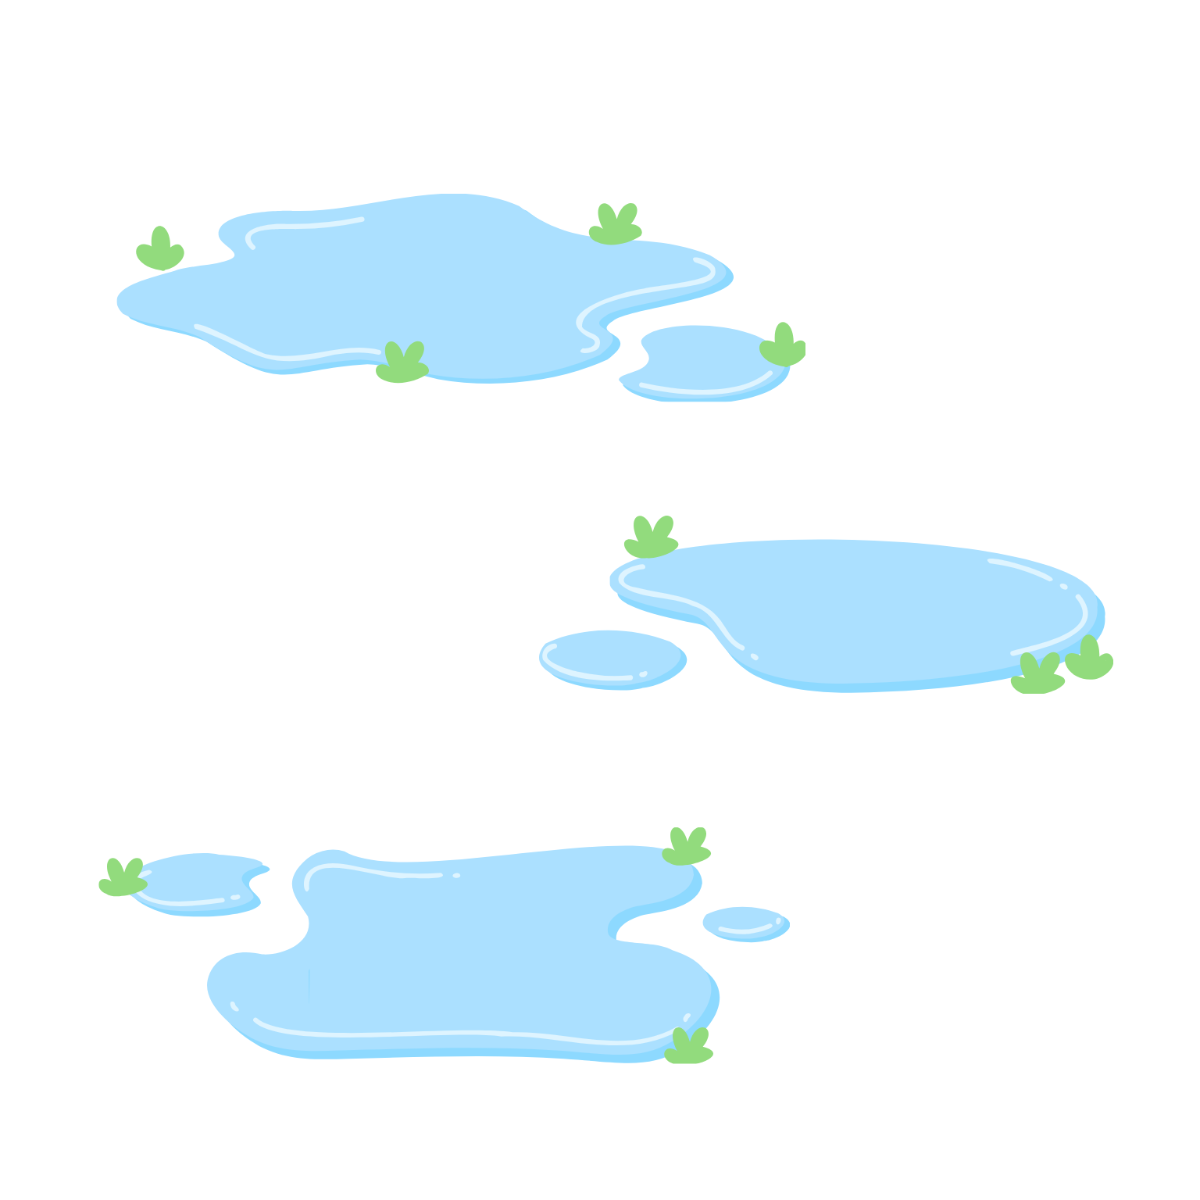 Puddle of Water Vector